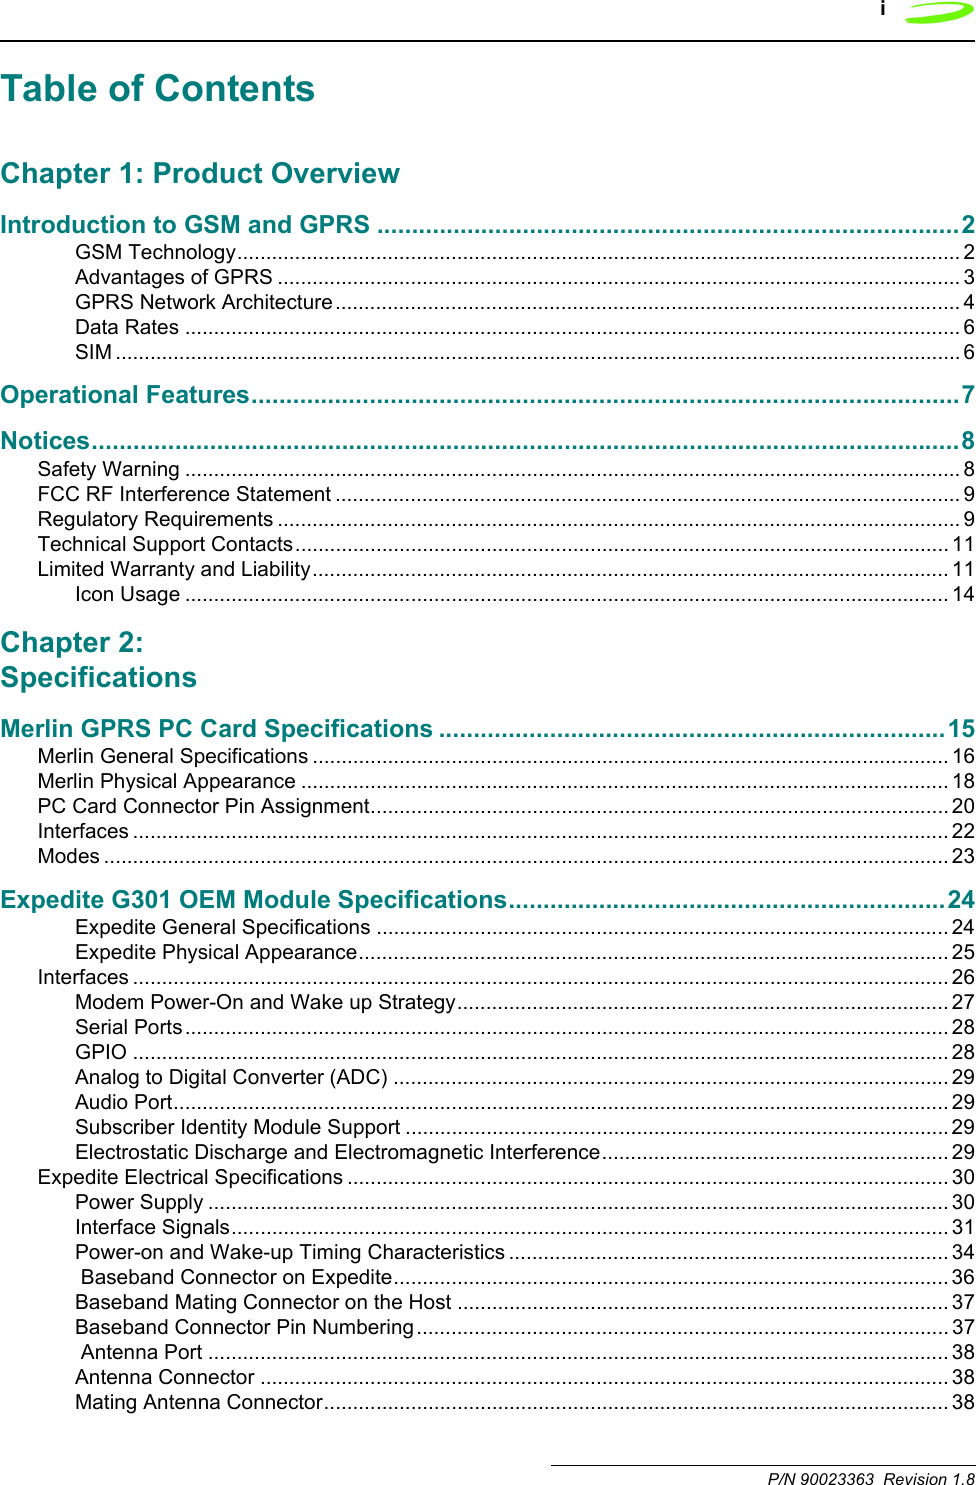 i P/N 90023363  Revision 1.8Table of ContentsChapter 1: Product OverviewIntroduction to GSM and GPRS ....................................................................................2GSM Technology............................................................................................................................. 2Advantages of GPRS ...................................................................................................................... 3GPRS Network Architecture............................................................................................................ 4Data Rates ...................................................................................................................................... 6SIM .................................................................................................................................................. 6Operational Features......................................................................................................7Notices.............................................................................................................................8Safety Warning ...................................................................................................................................... 8FCC RF Interference Statement ............................................................................................................ 9Regulatory Requirements ...................................................................................................................... 9Technical Support Contacts................................................................................................................. 11Limited Warranty and Liability.............................................................................................................. 11Icon Usage .................................................................................................................................... 14Chapter 2: SpecificationsMerlin GPRS PC Card Specifications .........................................................................15Merlin General Specifications .............................................................................................................. 16Merlin Physical Appearance ................................................................................................................ 18PC Card Connector Pin Assignment.................................................................................................... 20Interfaces ............................................................................................................................................. 22Modes .................................................................................................................................................. 23Expedite G301 OEM Module Specifications...............................................................24Expedite General Specifications ................................................................................................... 24Expedite Physical Appearance...................................................................................................... 25Interfaces ............................................................................................................................................. 26Modem Power-On and Wake up Strategy..................................................................................... 27Serial Ports.................................................................................................................................... 28GPIO ............................................................................................................................................. 28Analog to Digital Converter (ADC) ................................................................................................ 29Audio Port...................................................................................................................................... 29Subscriber Identity Module Support ..............................................................................................29Electrostatic Discharge and Electromagnetic Interference............................................................ 29Expedite Electrical Specifications ........................................................................................................ 30Power Supply ................................................................................................................................ 30Interface Signals............................................................................................................................ 31Power-on and Wake-up Timing Characteristics ............................................................................ 34 Baseband Connector on Expedite................................................................................................ 36Baseband Mating Connector on the Host ..................................................................................... 37Baseband Connector Pin Numbering............................................................................................ 37 Antenna Port ................................................................................................................................ 38Antenna Connector ....................................................................................................................... 38Mating Antenna Connector............................................................................................................ 38